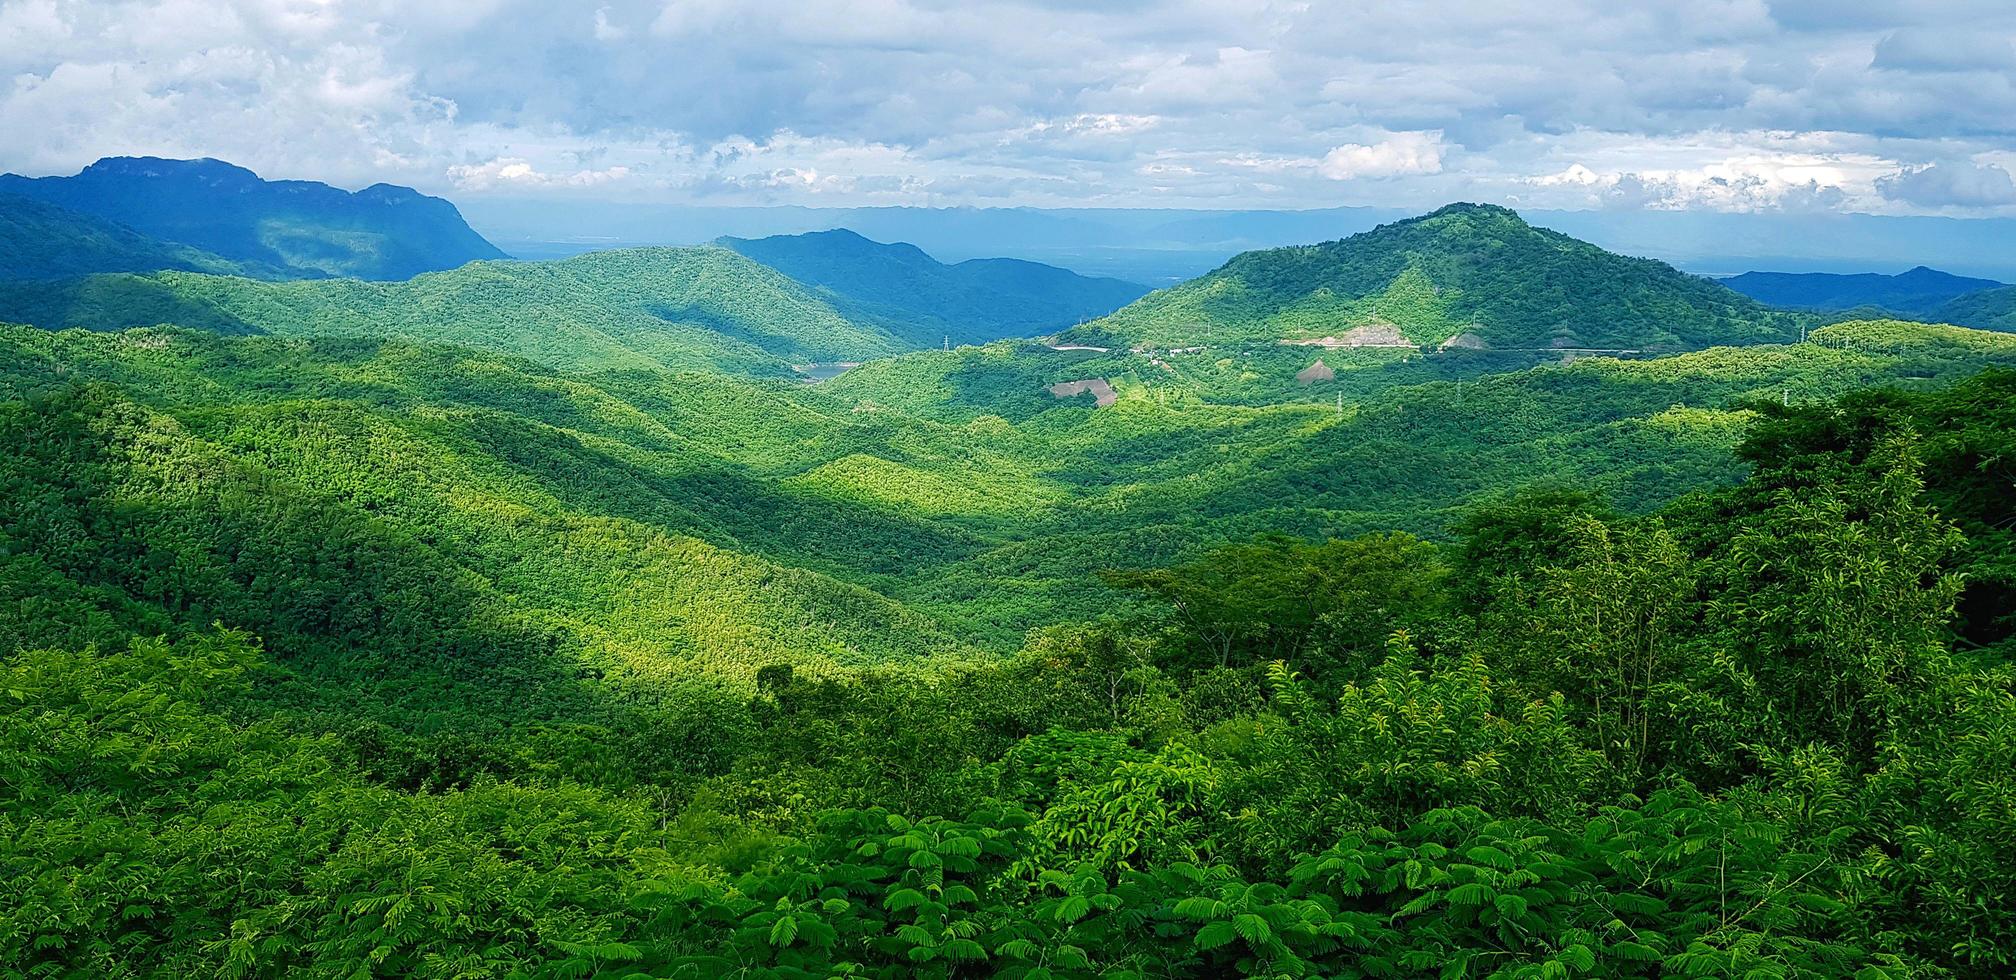 A lush green mountain range with a cloudy blue sky above. - Jungle